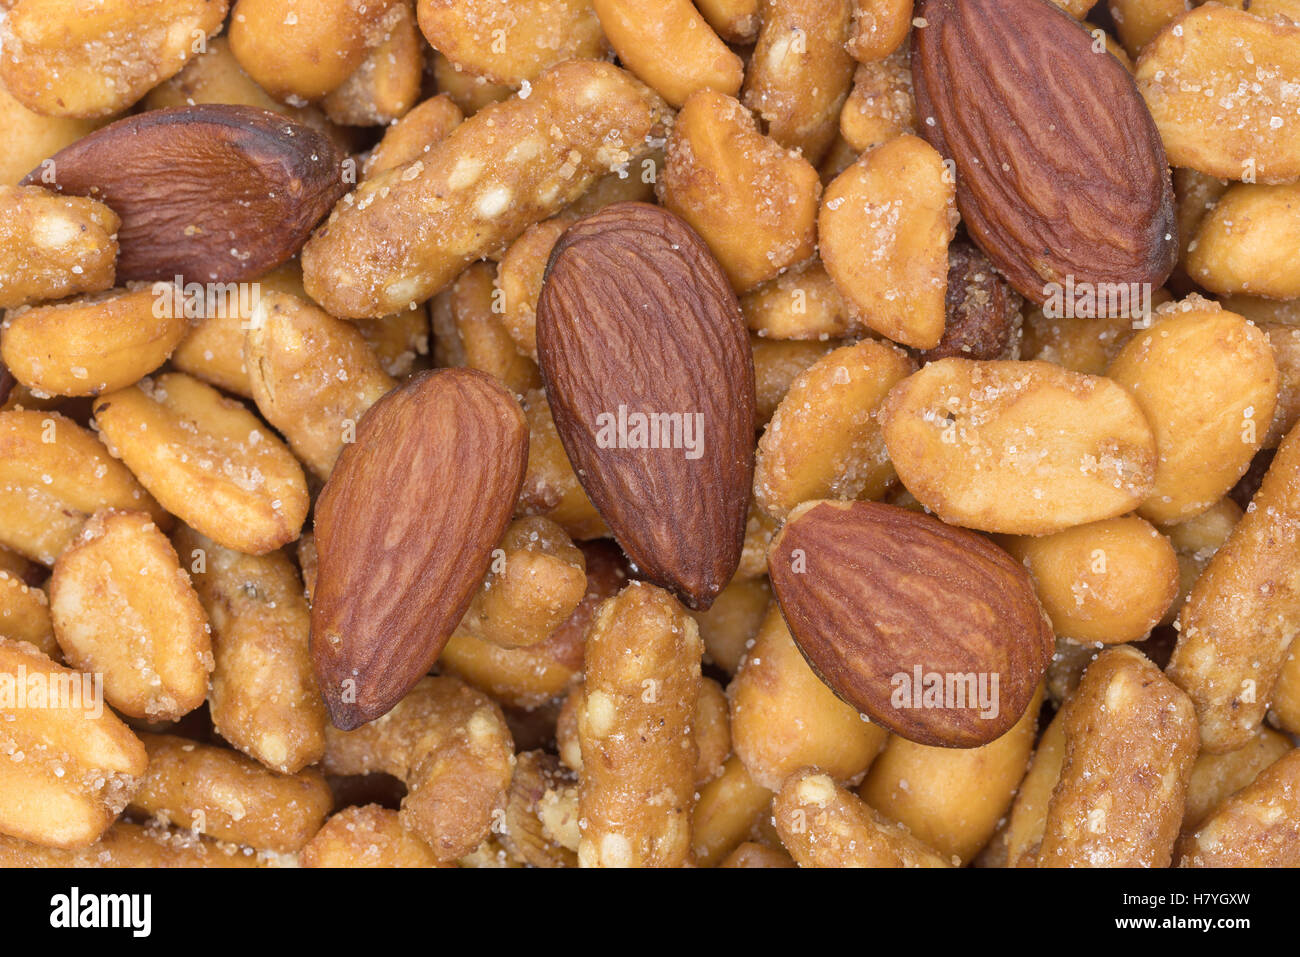 A very close view of an energy trail mix blend of peanuts, almonds and sesame sticks. Stock Photo